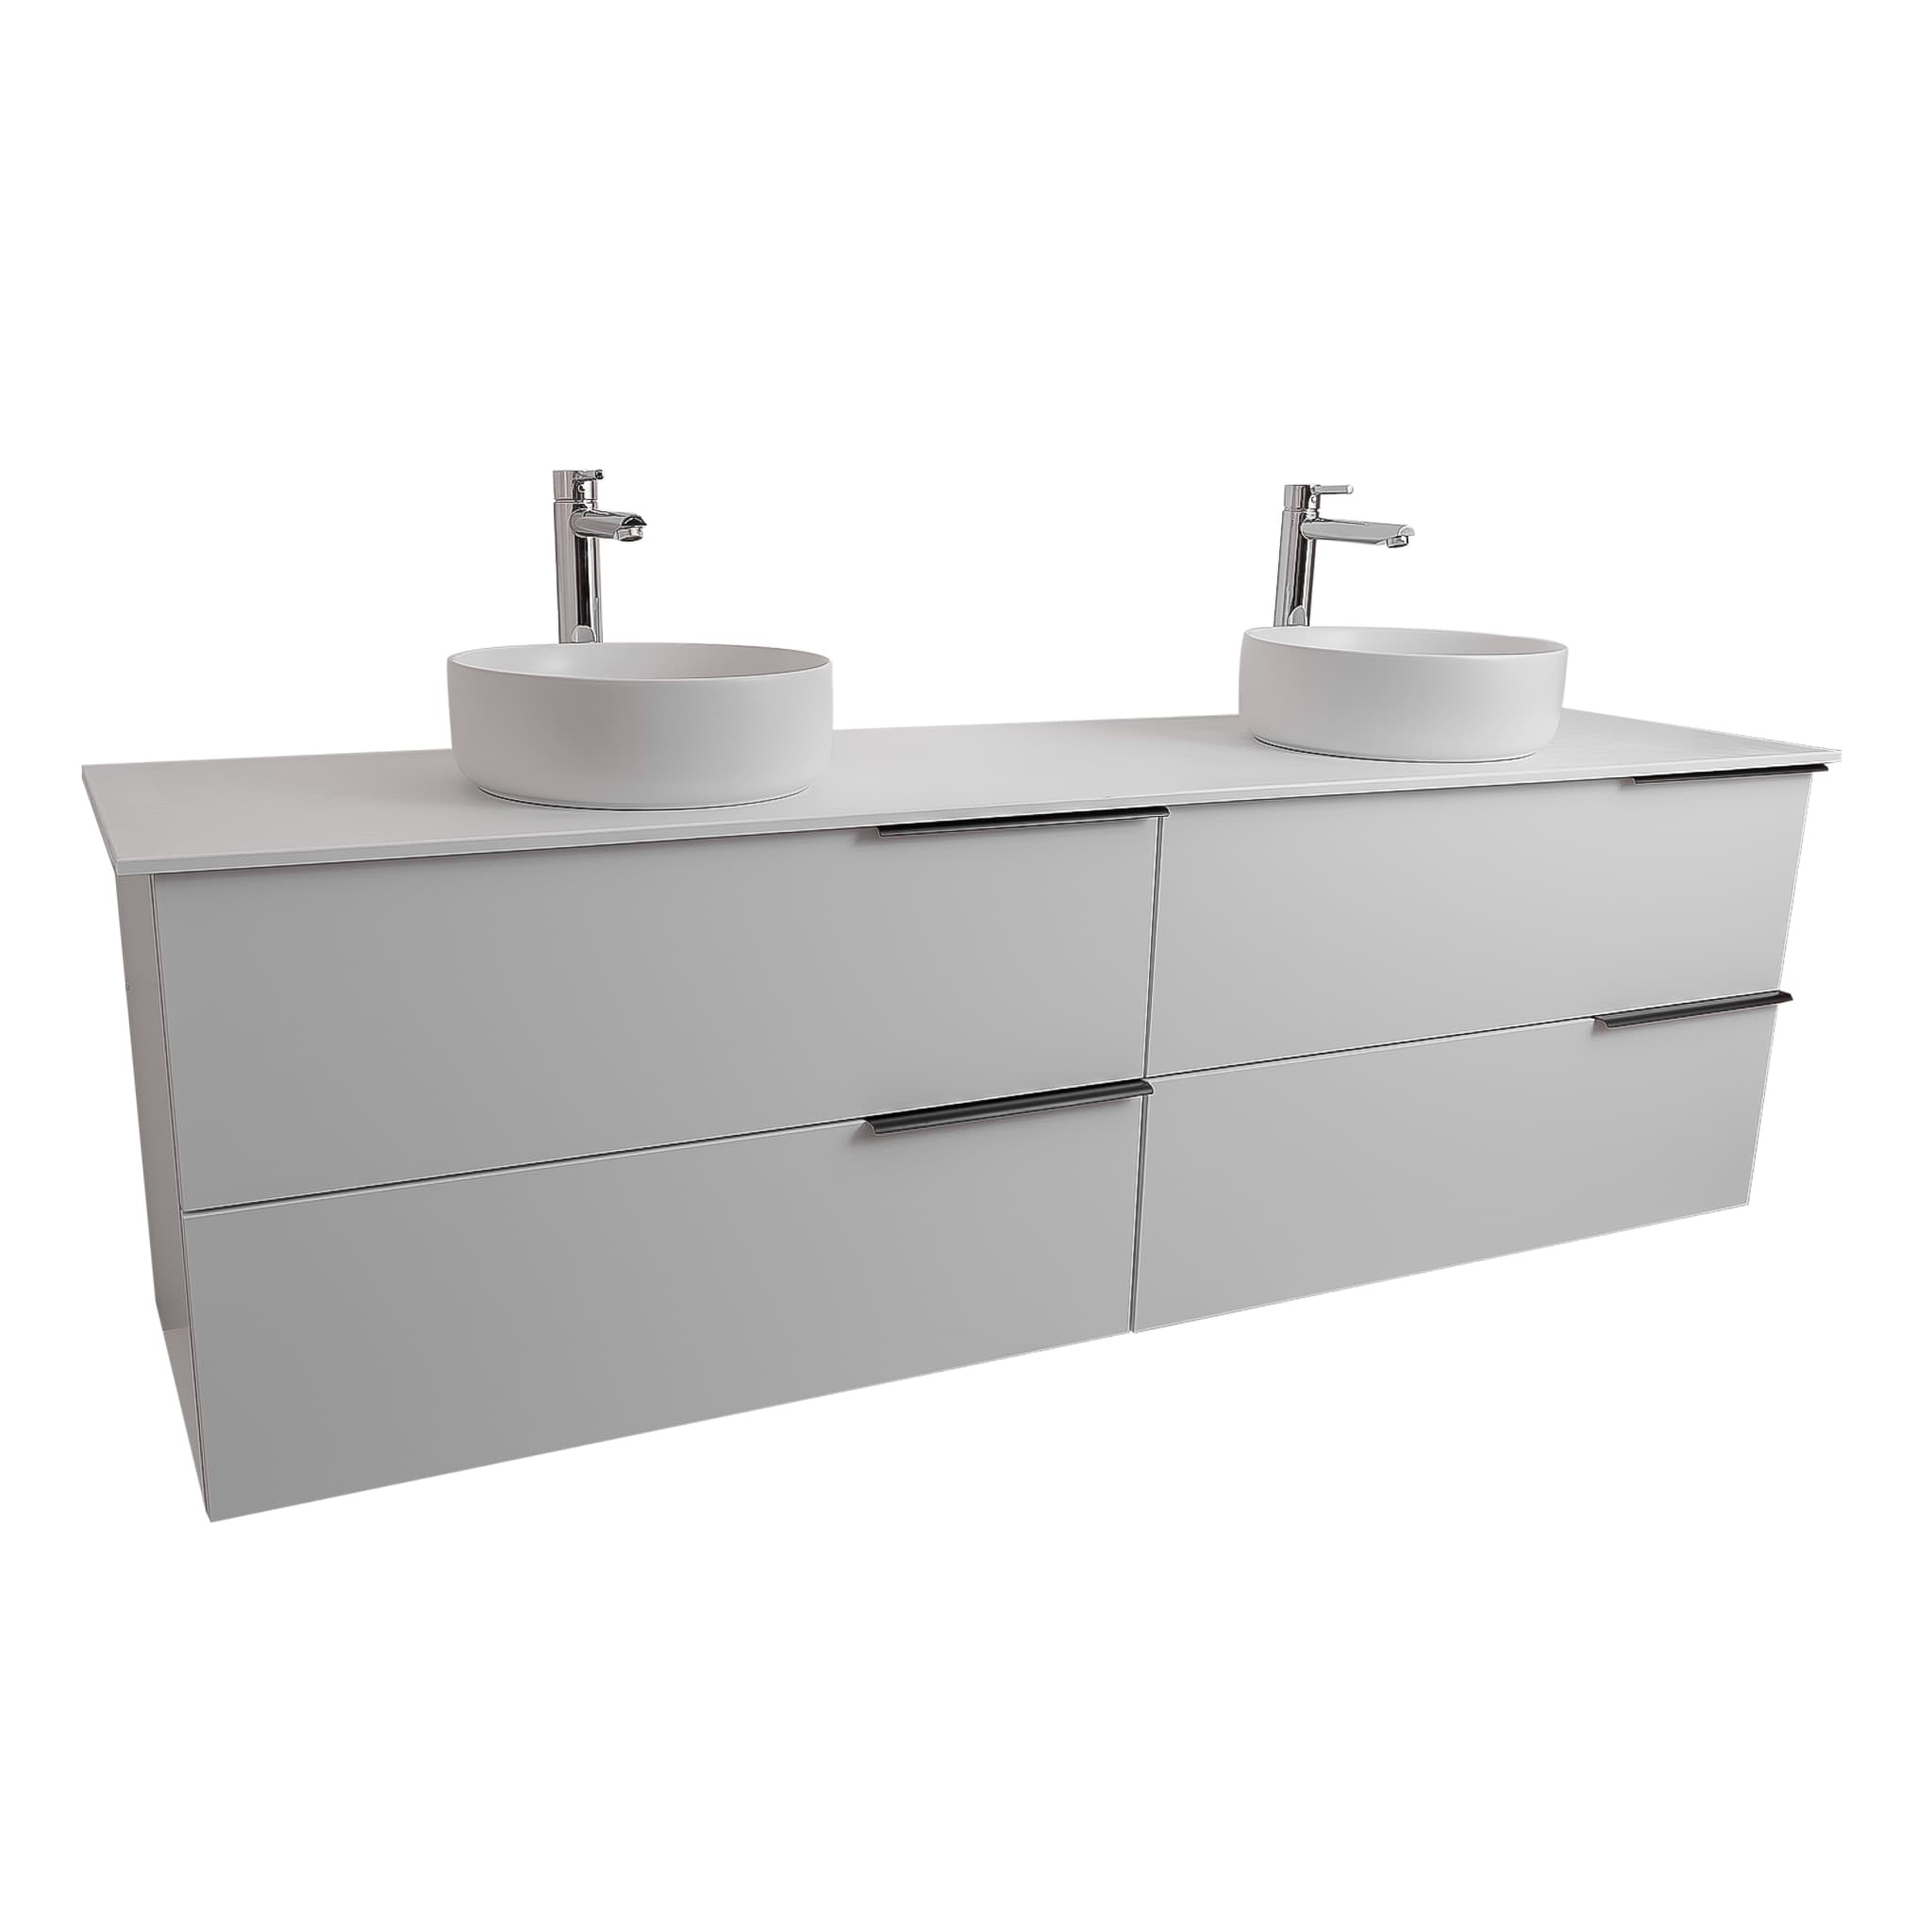 Mallorca 63 Matte White Cabinet, Ares White Top And Two Ares White Ceramic Basin, Wall Mounted Modern Vanity Set